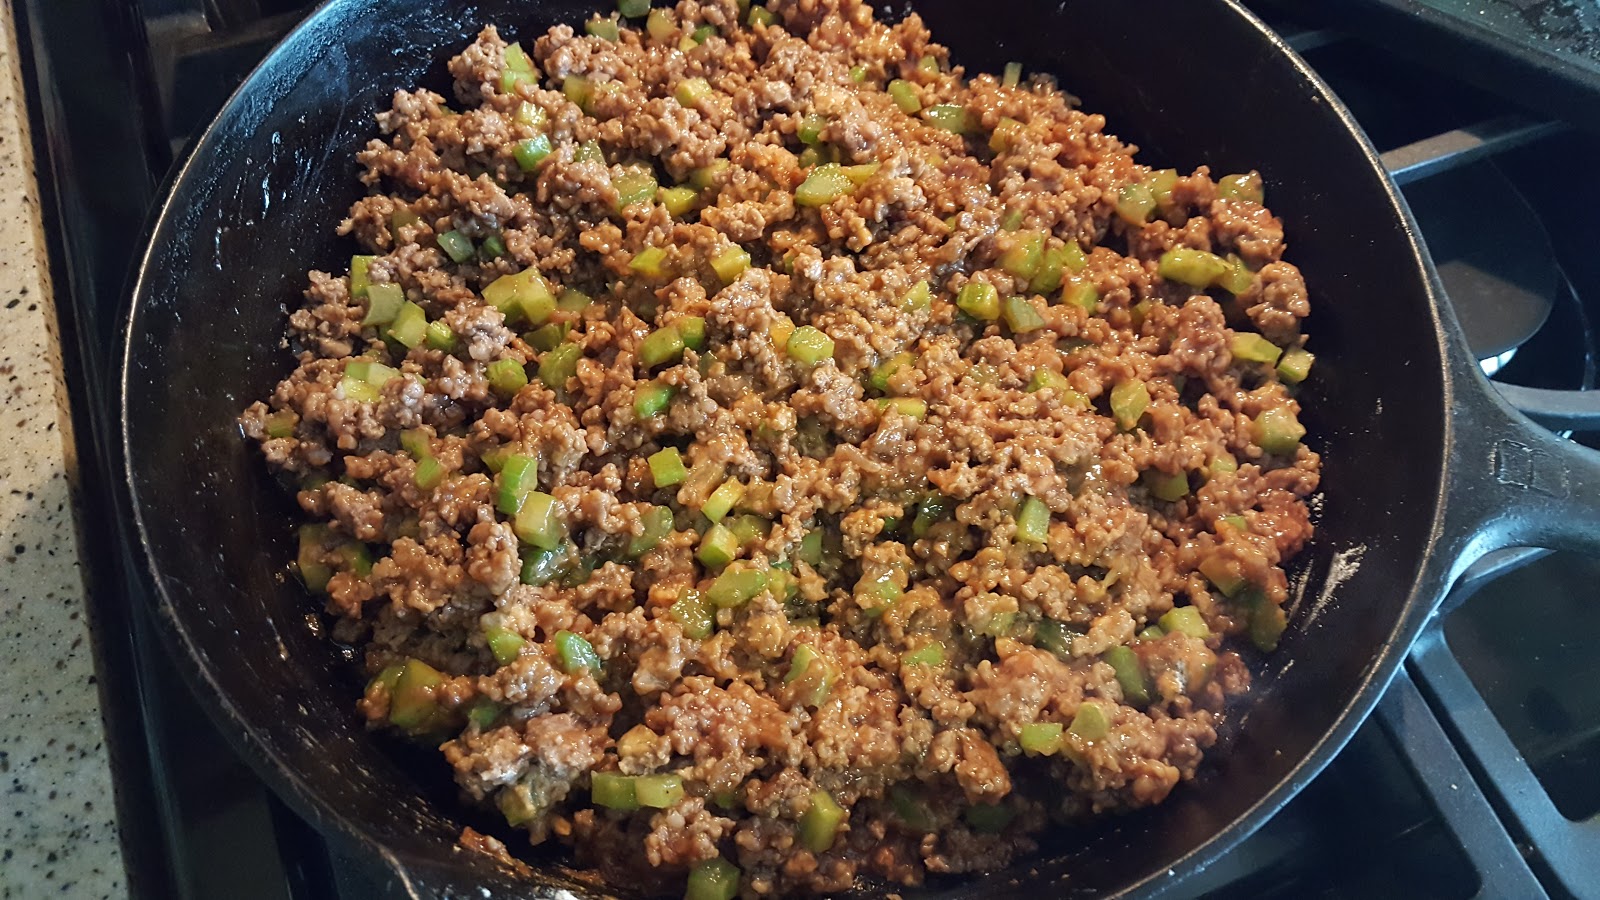 My Patchwork Quilt: SLOPPY JOES